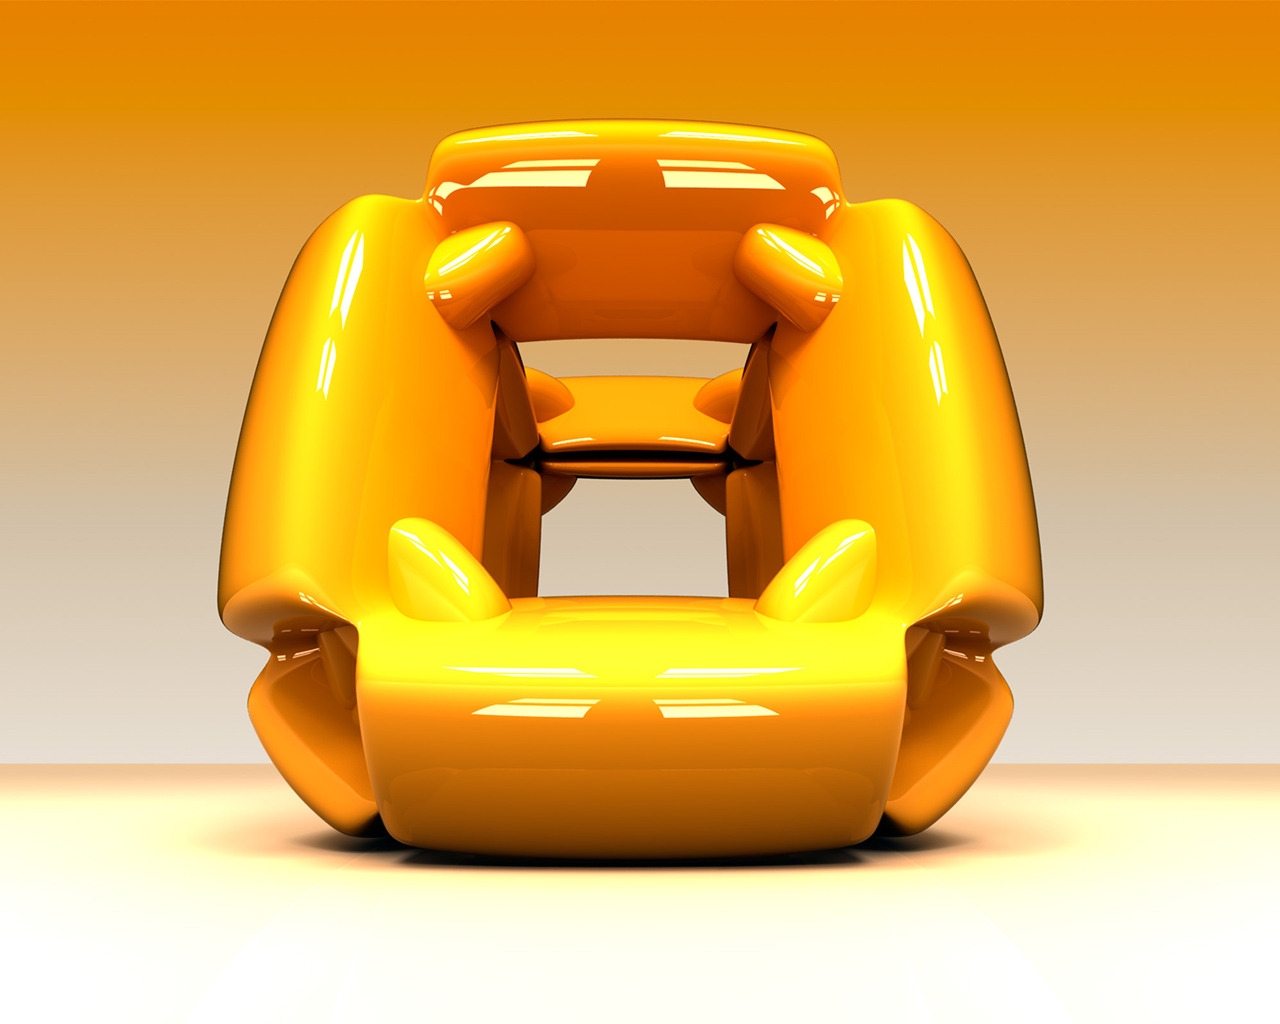 Hollow Cube for 1280 x 1024 resolution